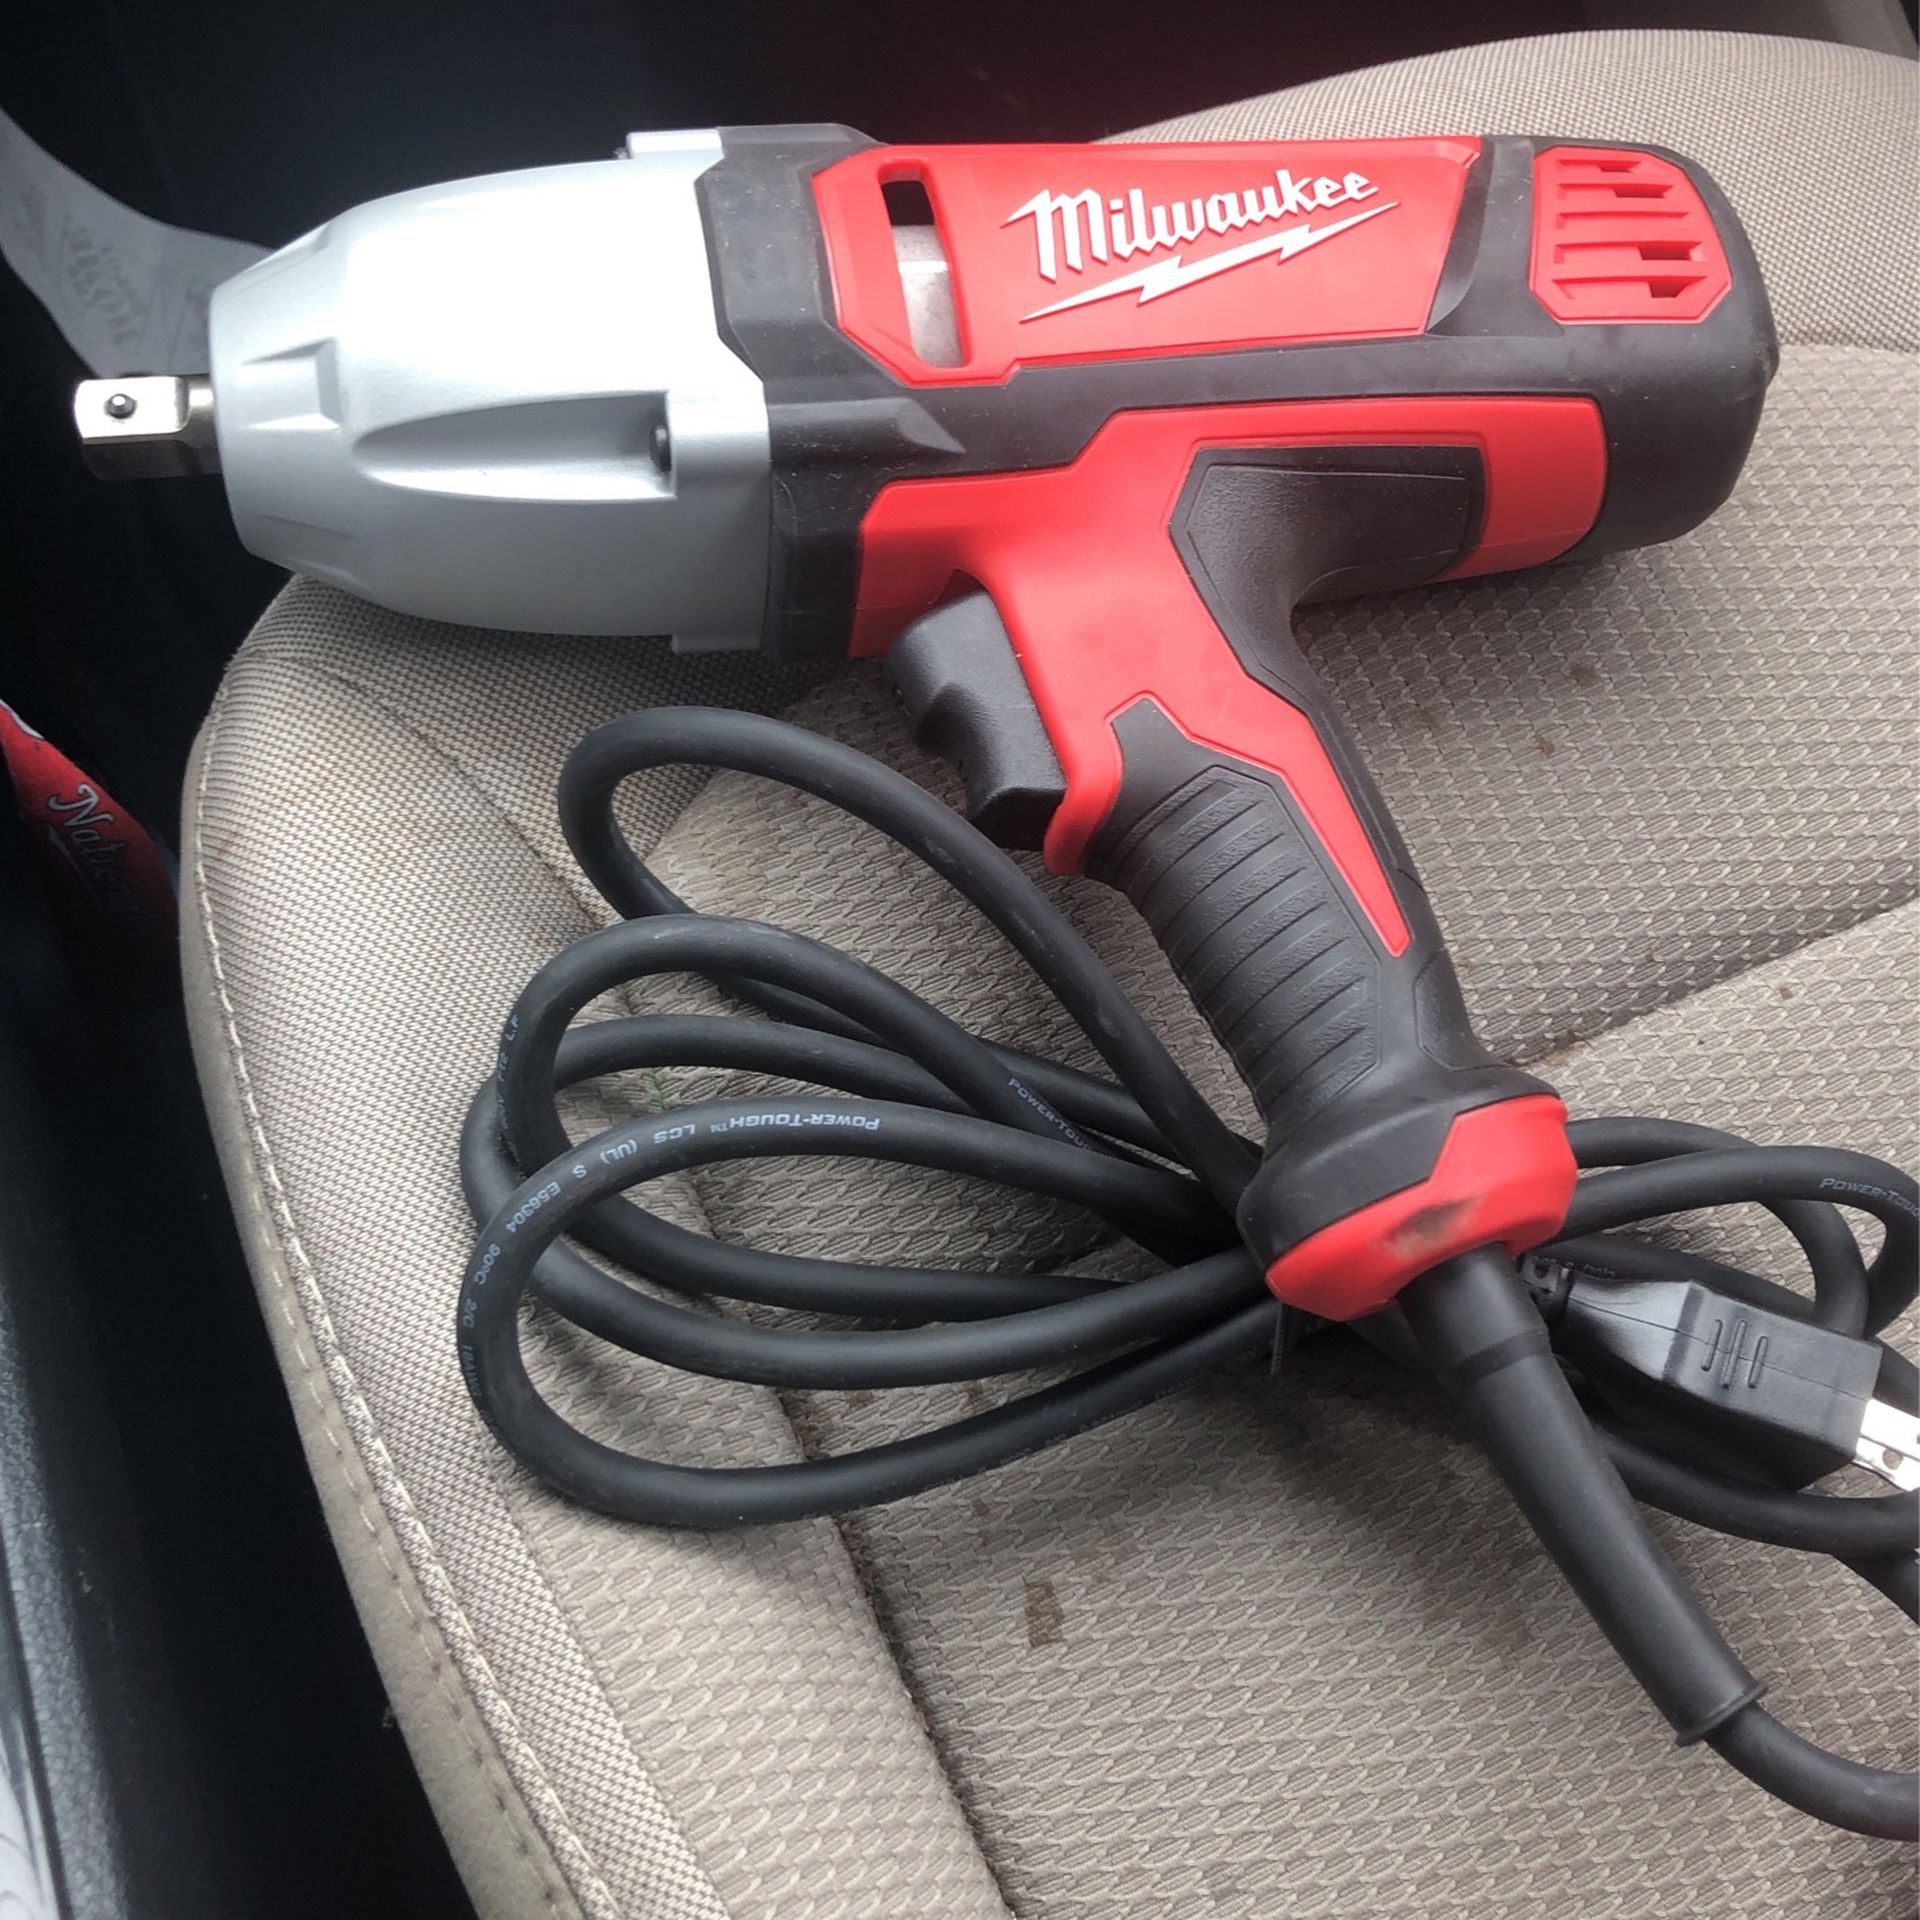 Milwaukee 1/2 Impact Wrench W/ Rocker Switch And Detent Pin